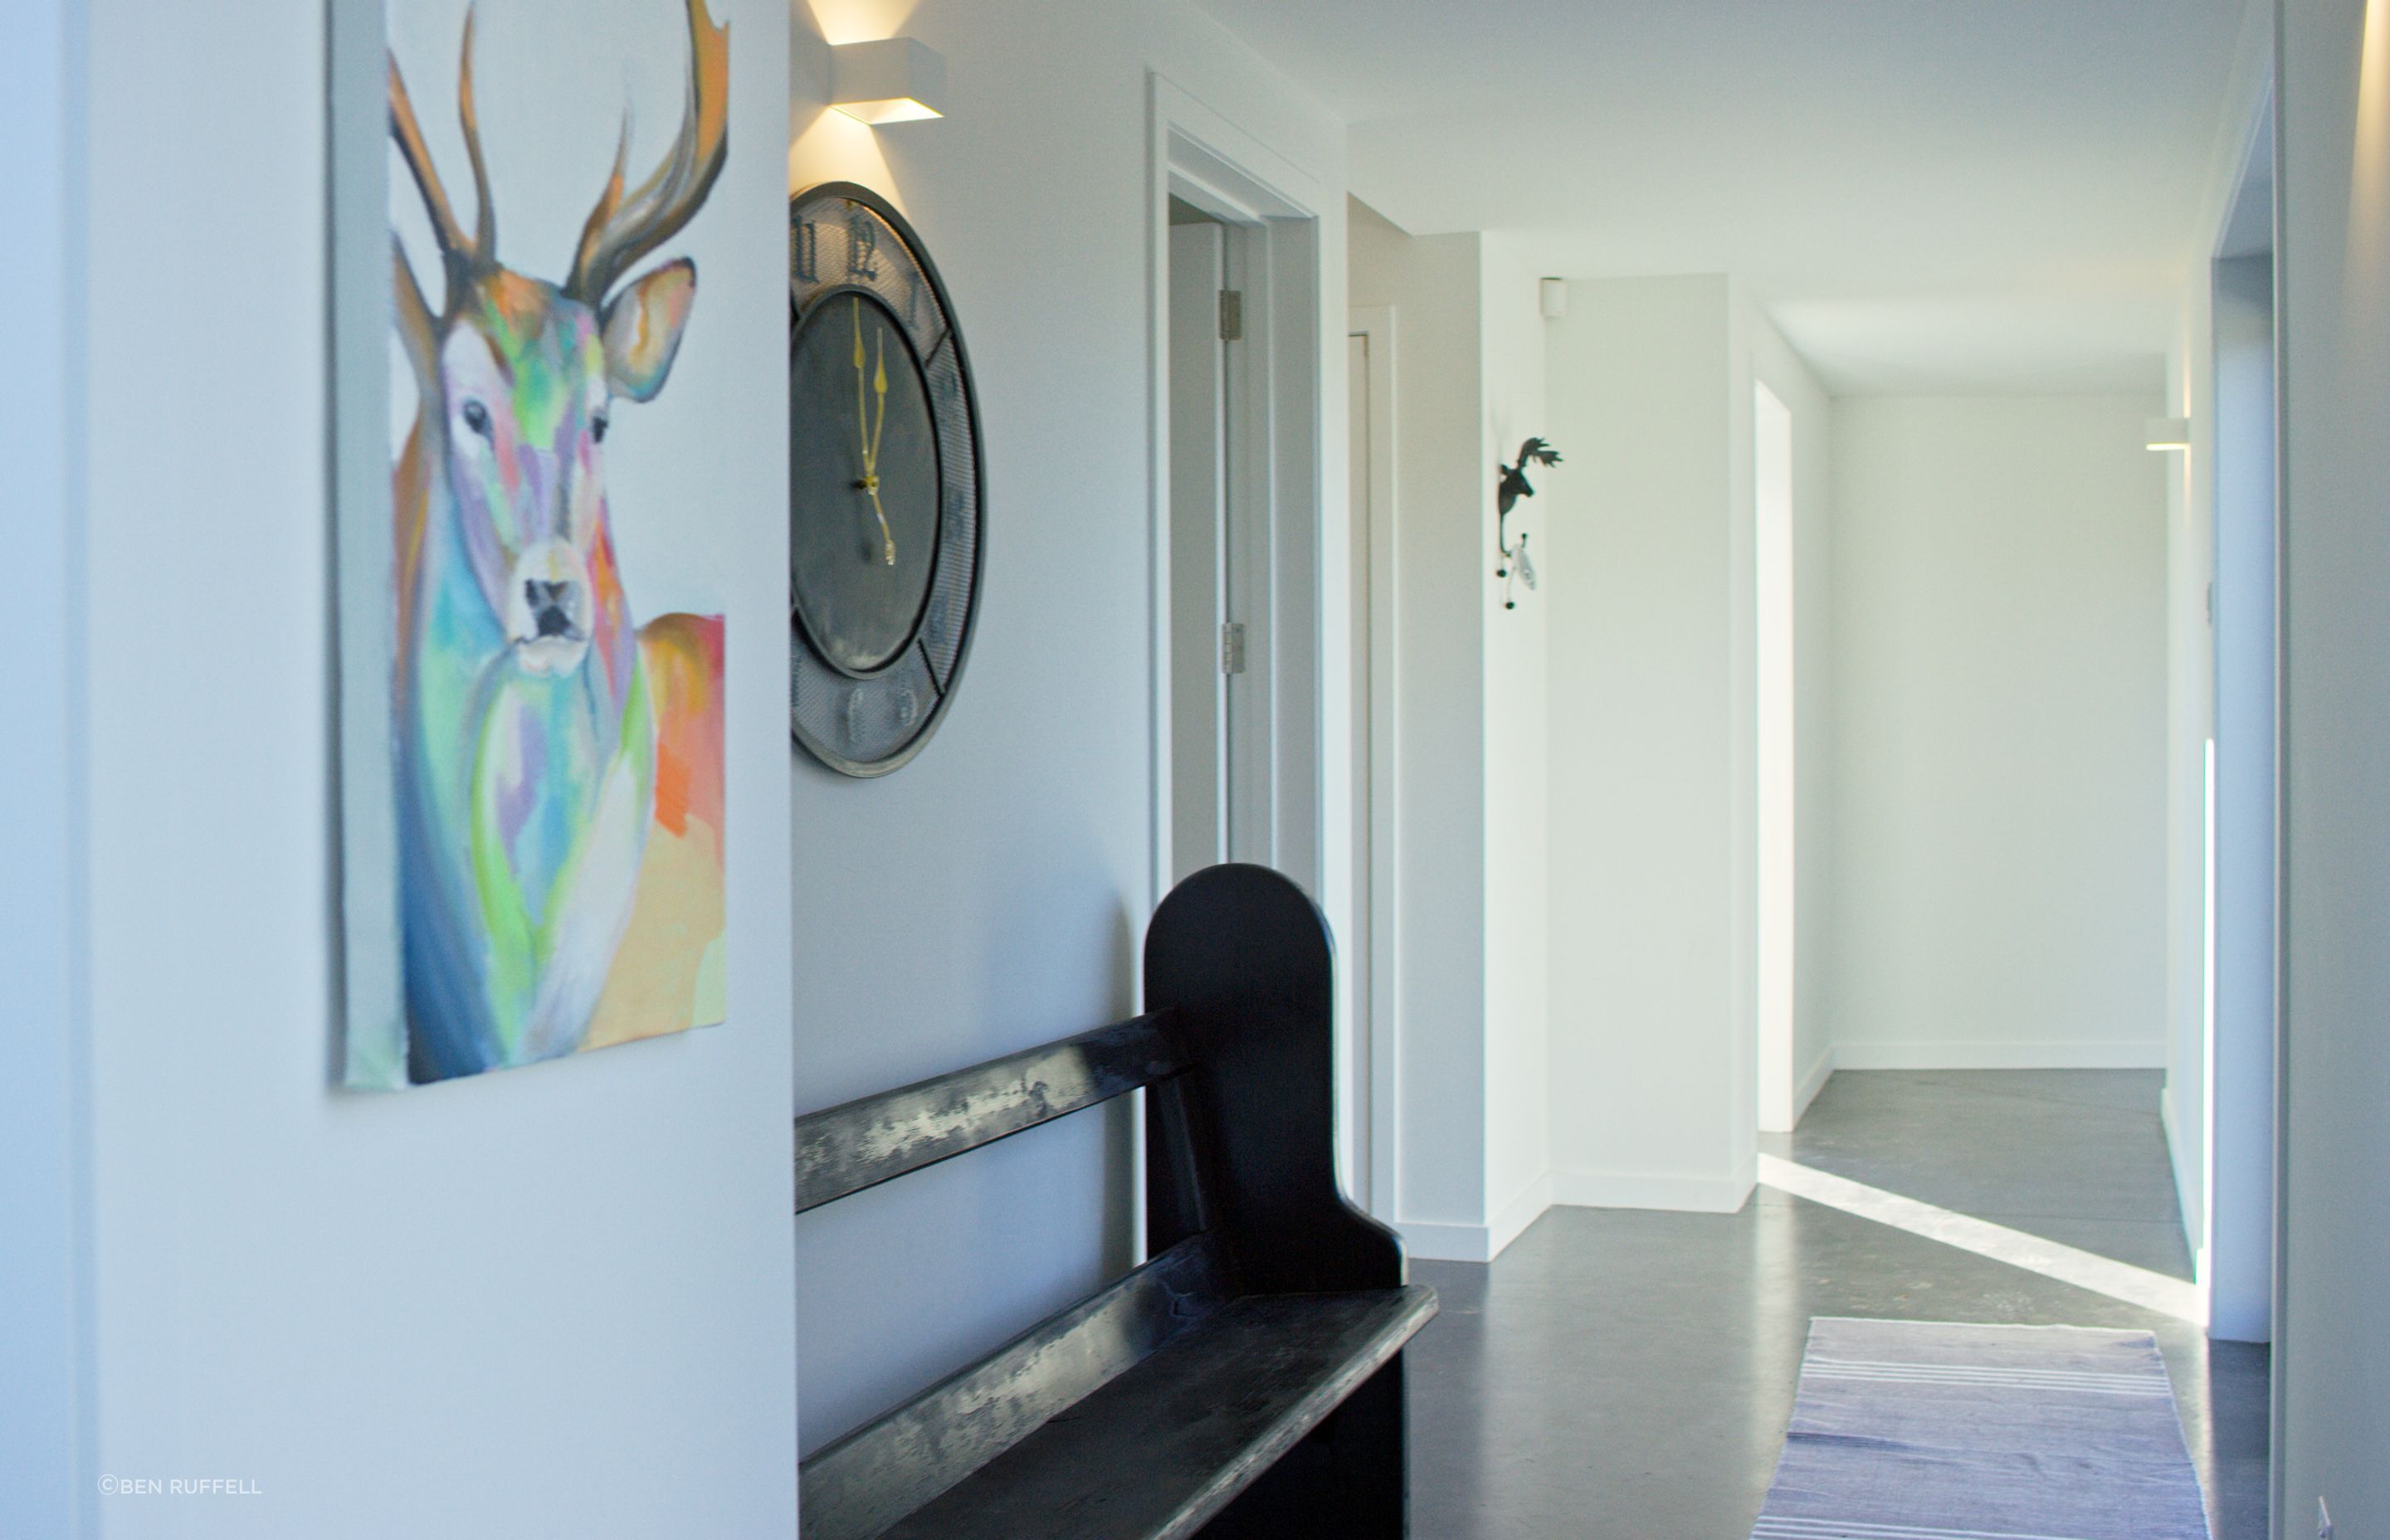 A long gallery corridor links the pavilions together and provides space for the artist-owner to display her artworks.